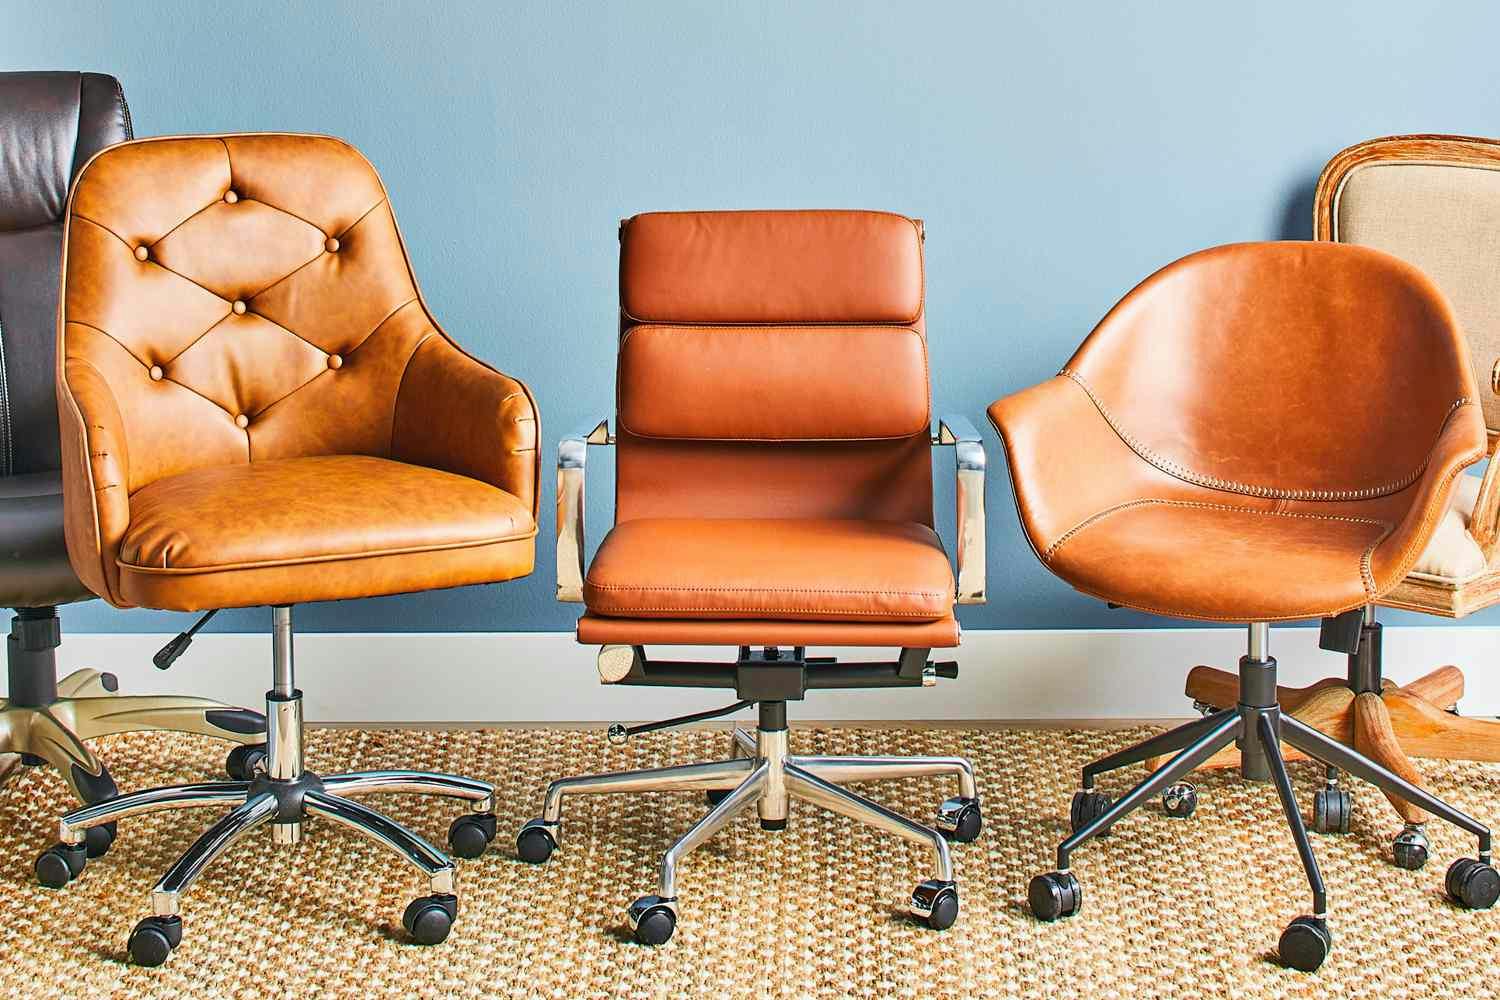 Thinking Beyond Comfort: How Office Chairs Drive Workplace Efficiency